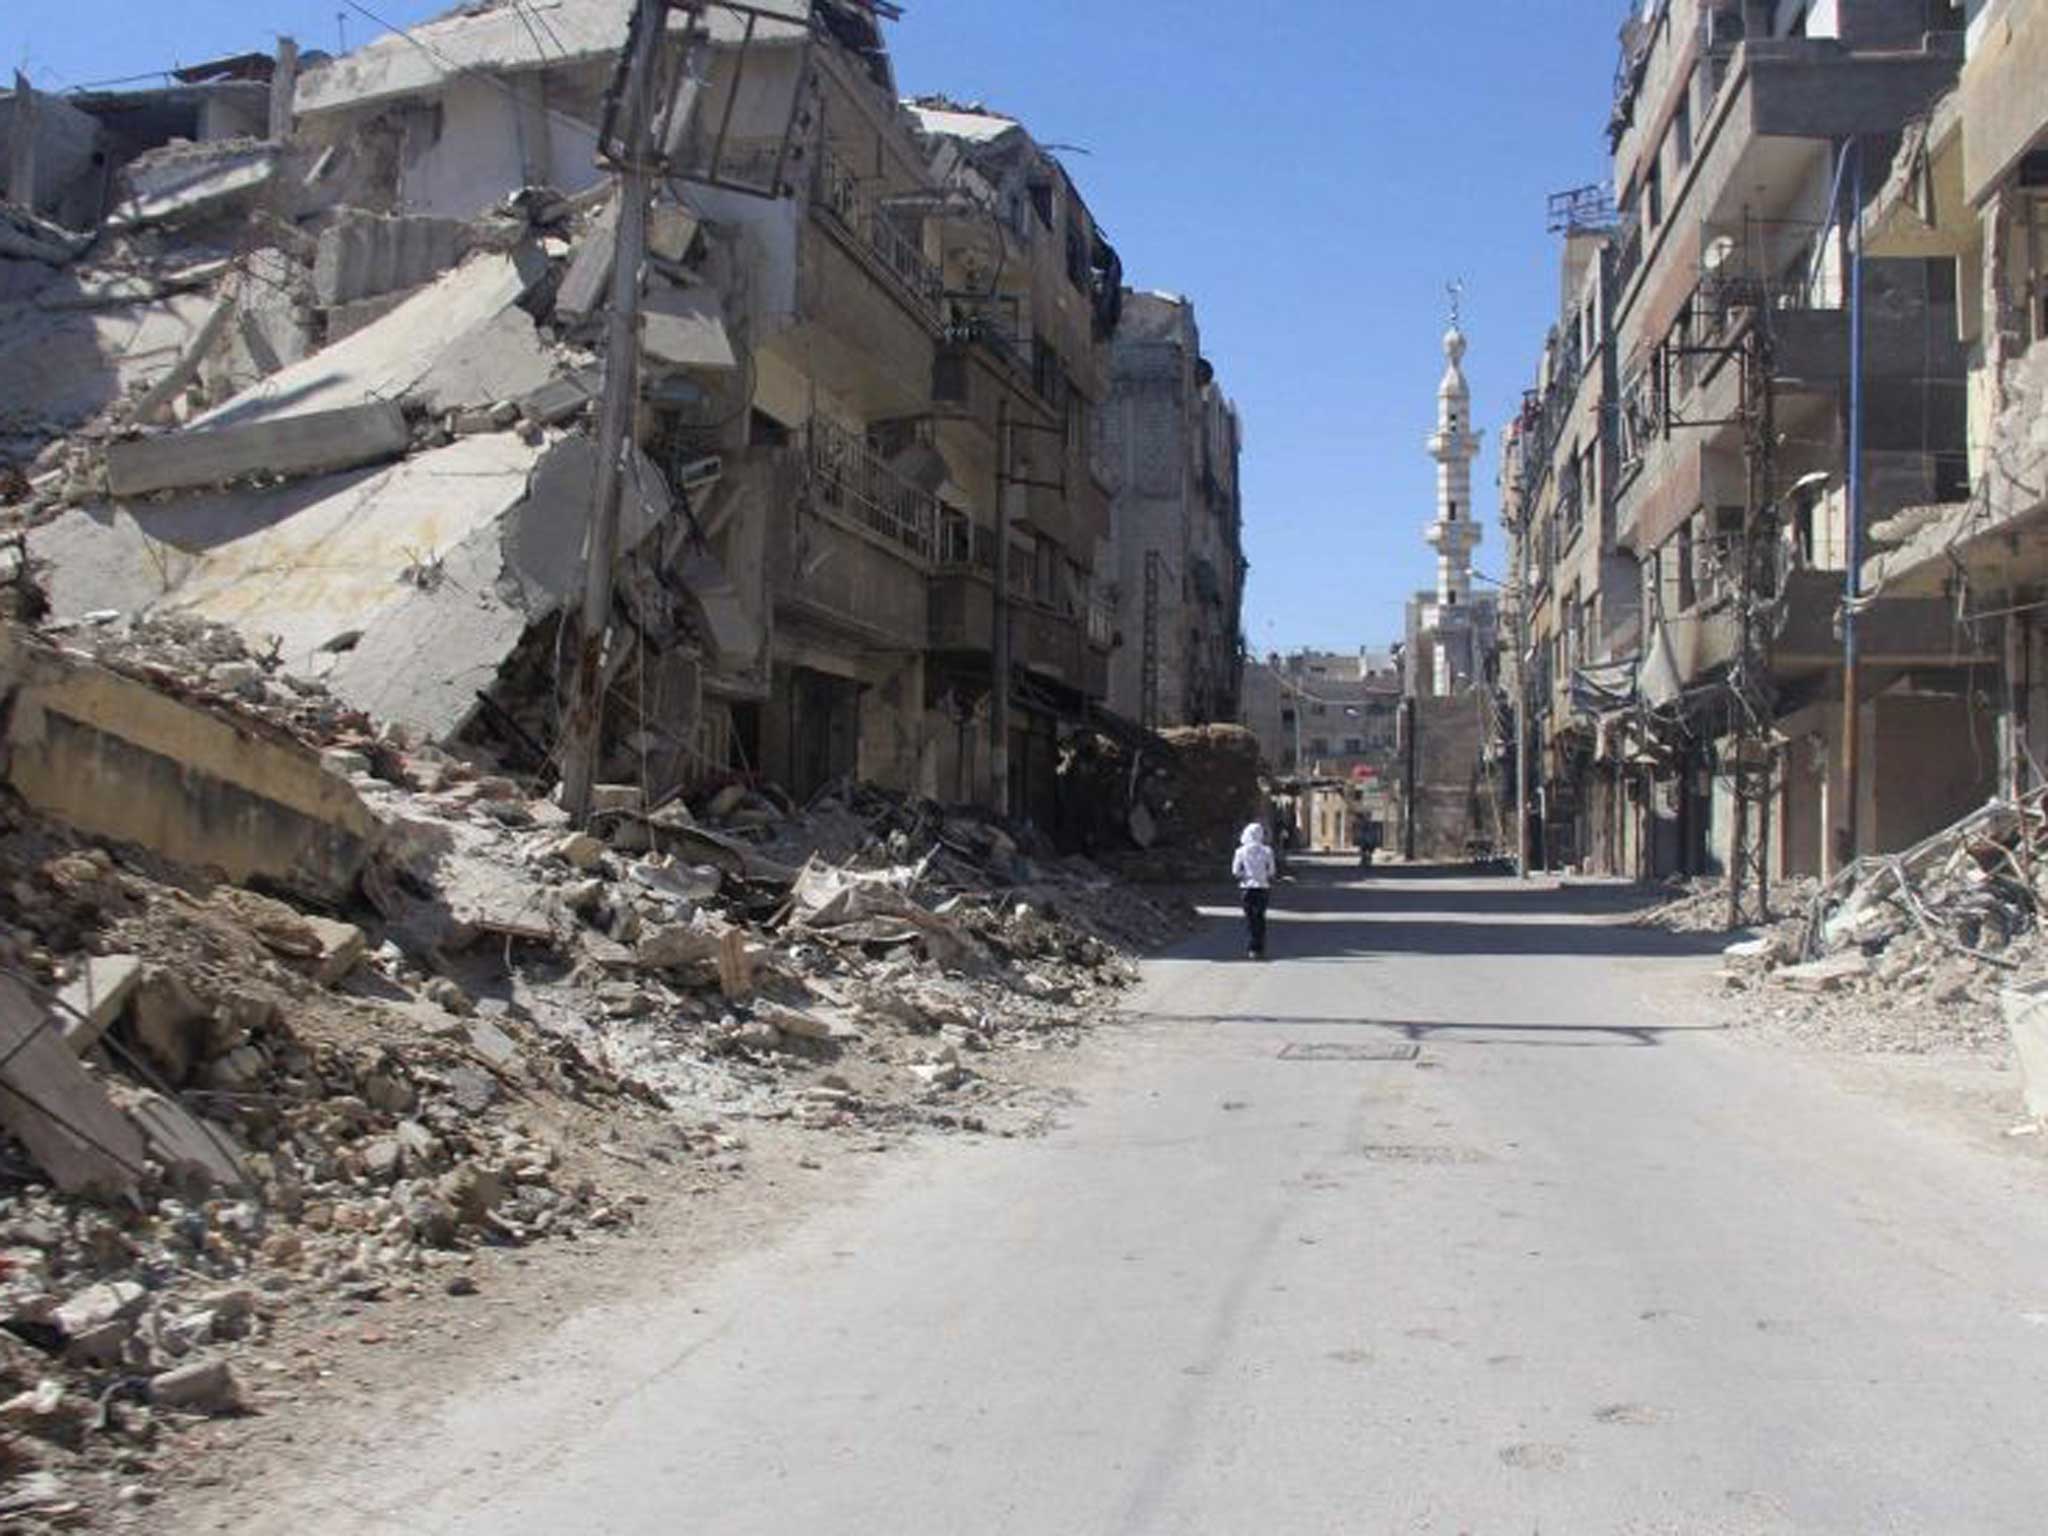 A resident walks alone down a ruined Damascus street